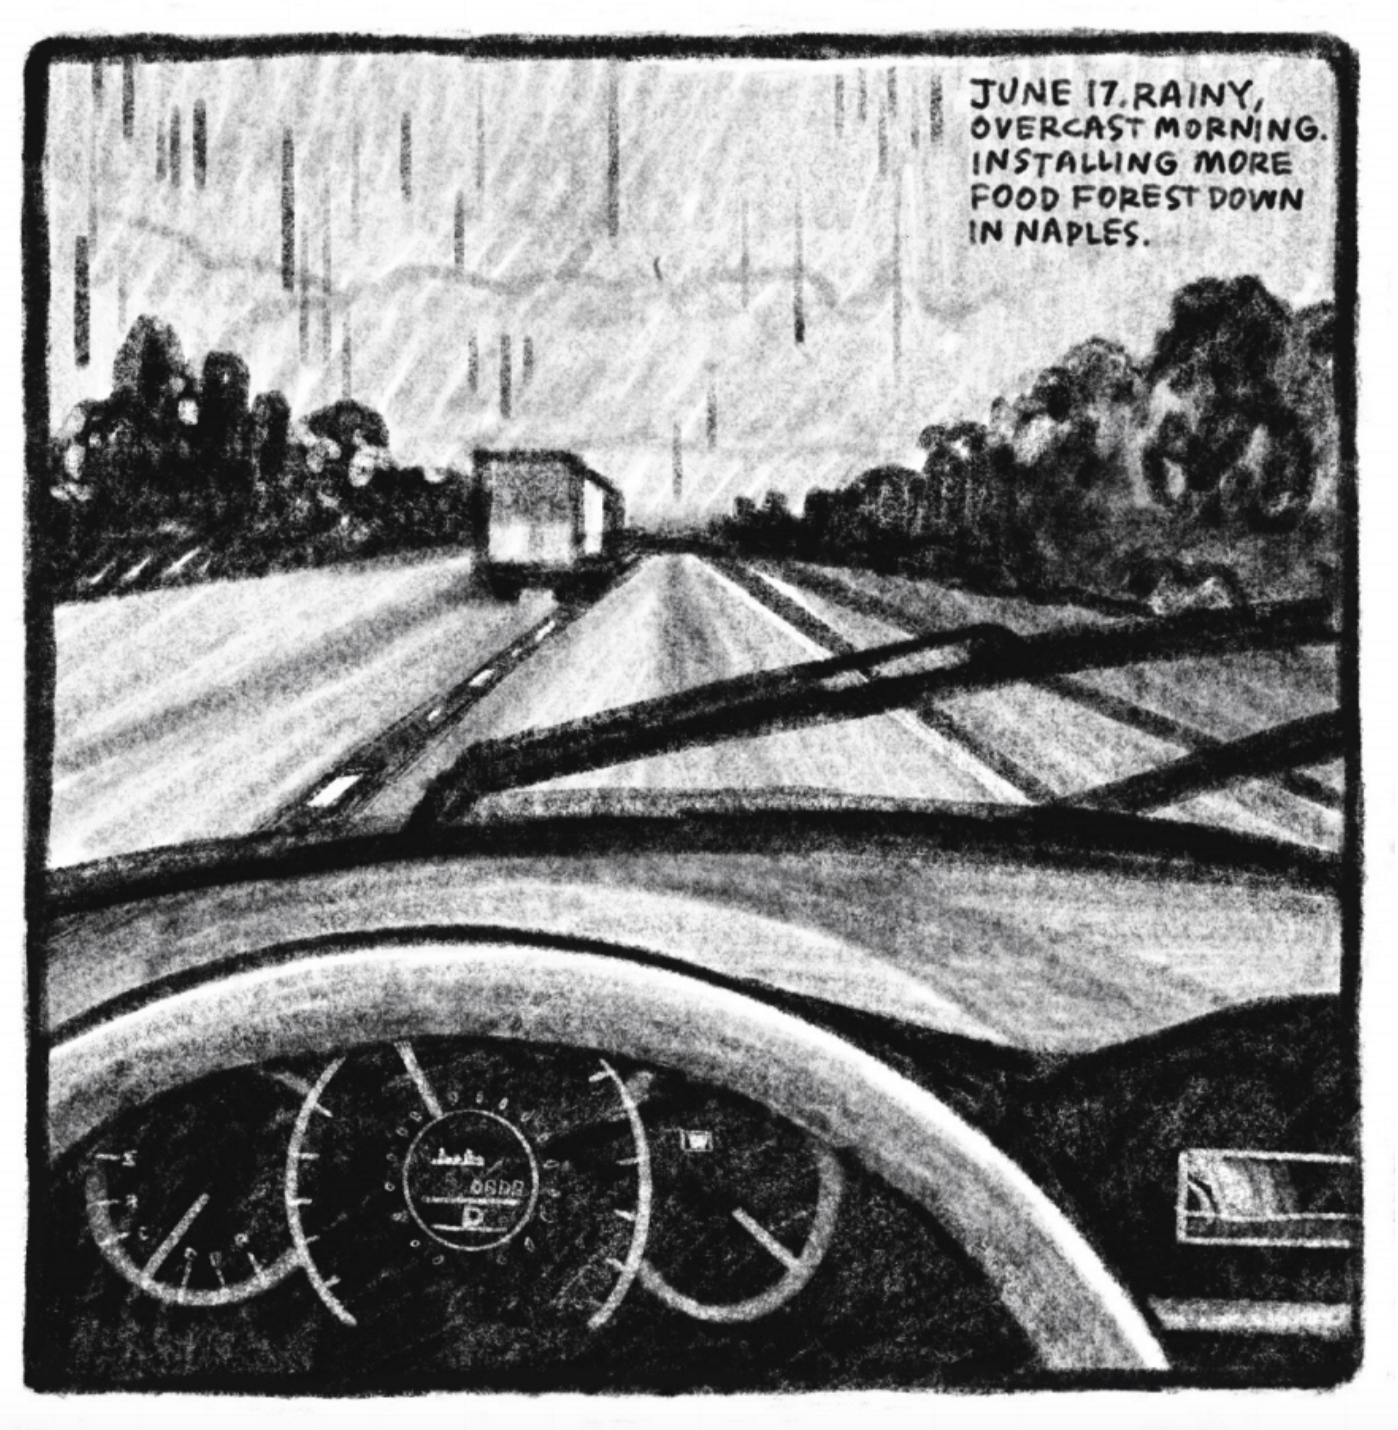 4. A view from the driverâ€™s seat of a car driving on the highway: it is rainy and the windshield wipers are on. Trees line the highway; a commercial truck drives off into the distance up ahead. â€œJune 17. Rainy, overcast morning. Installing more food forest down in Naples.â€